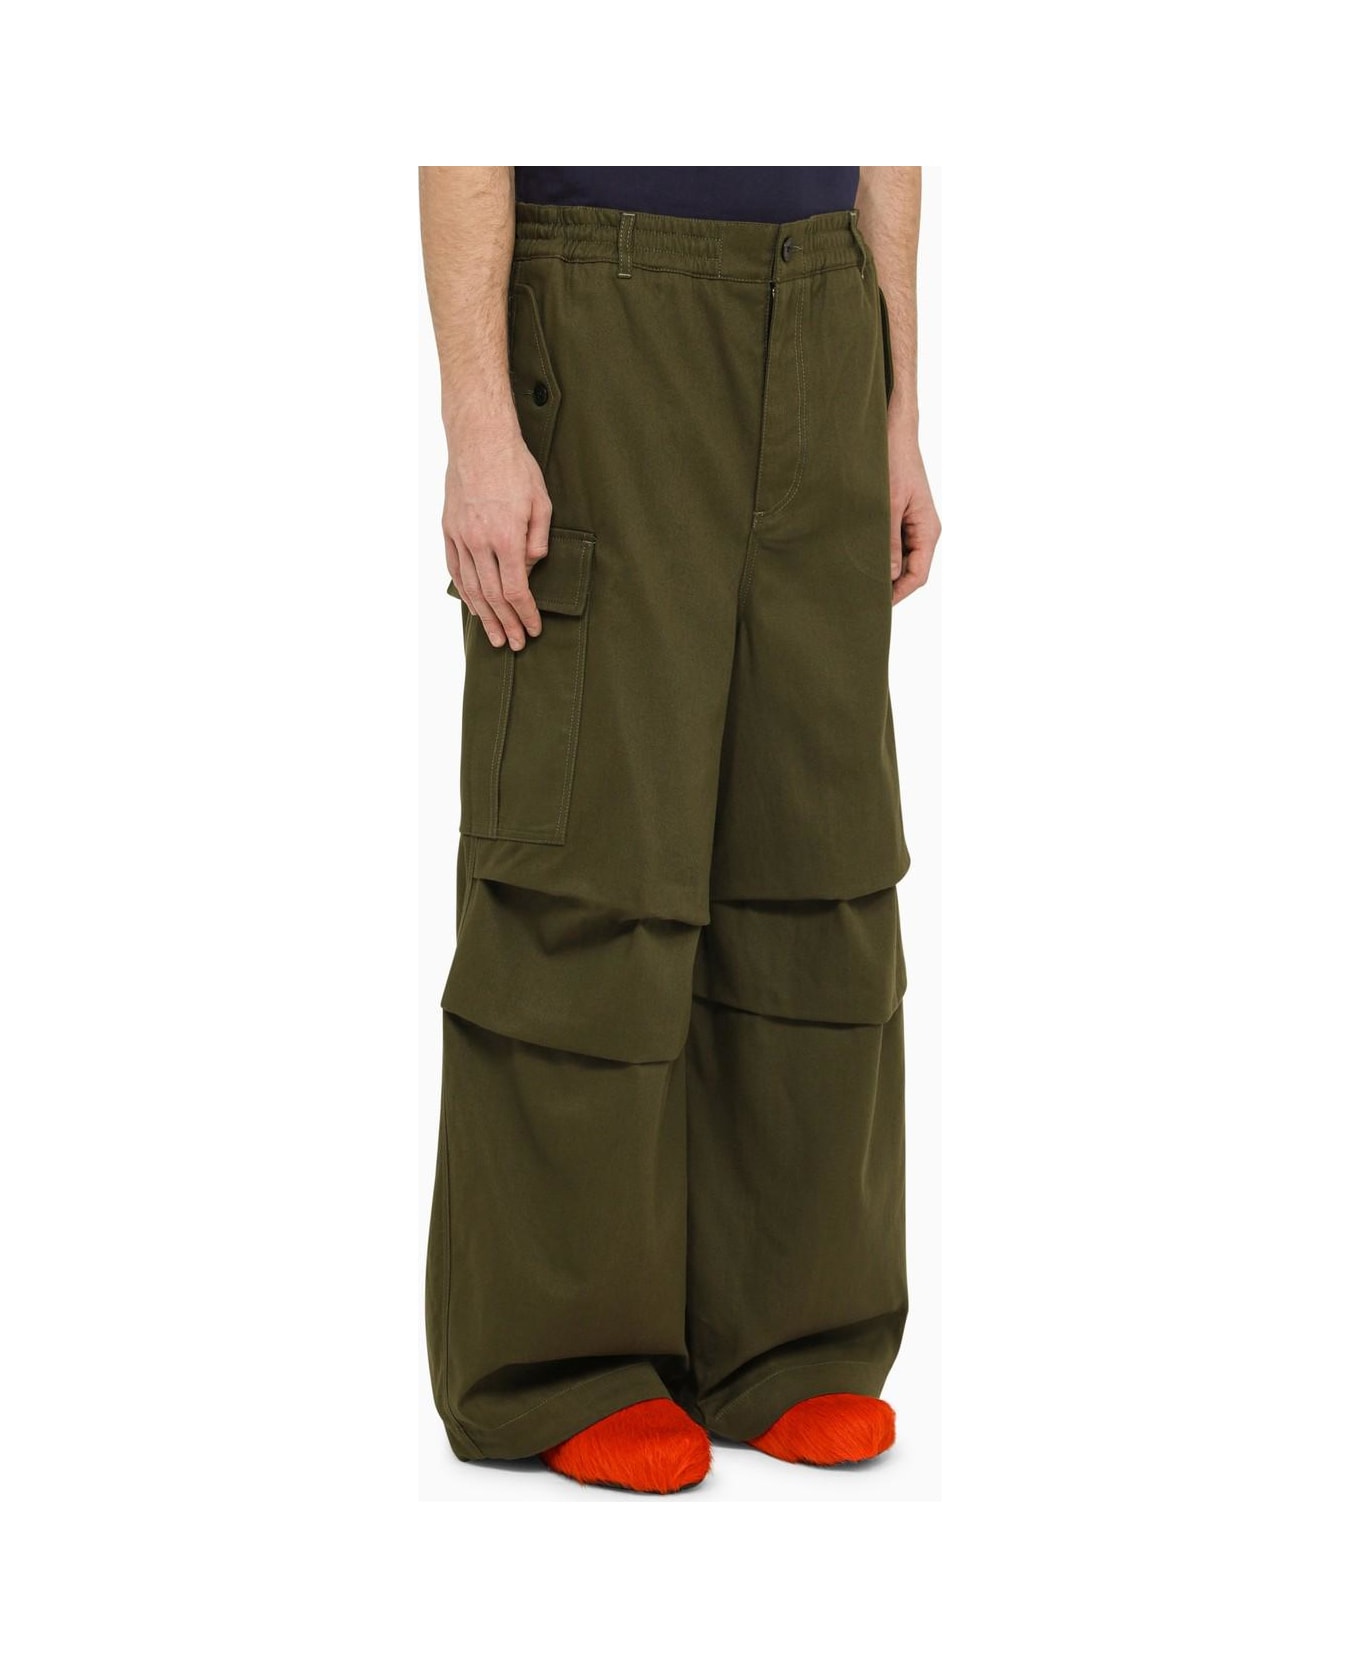 Marni Dark Green Cotton Blend Wide Cargo Trousers - Green ボトムス